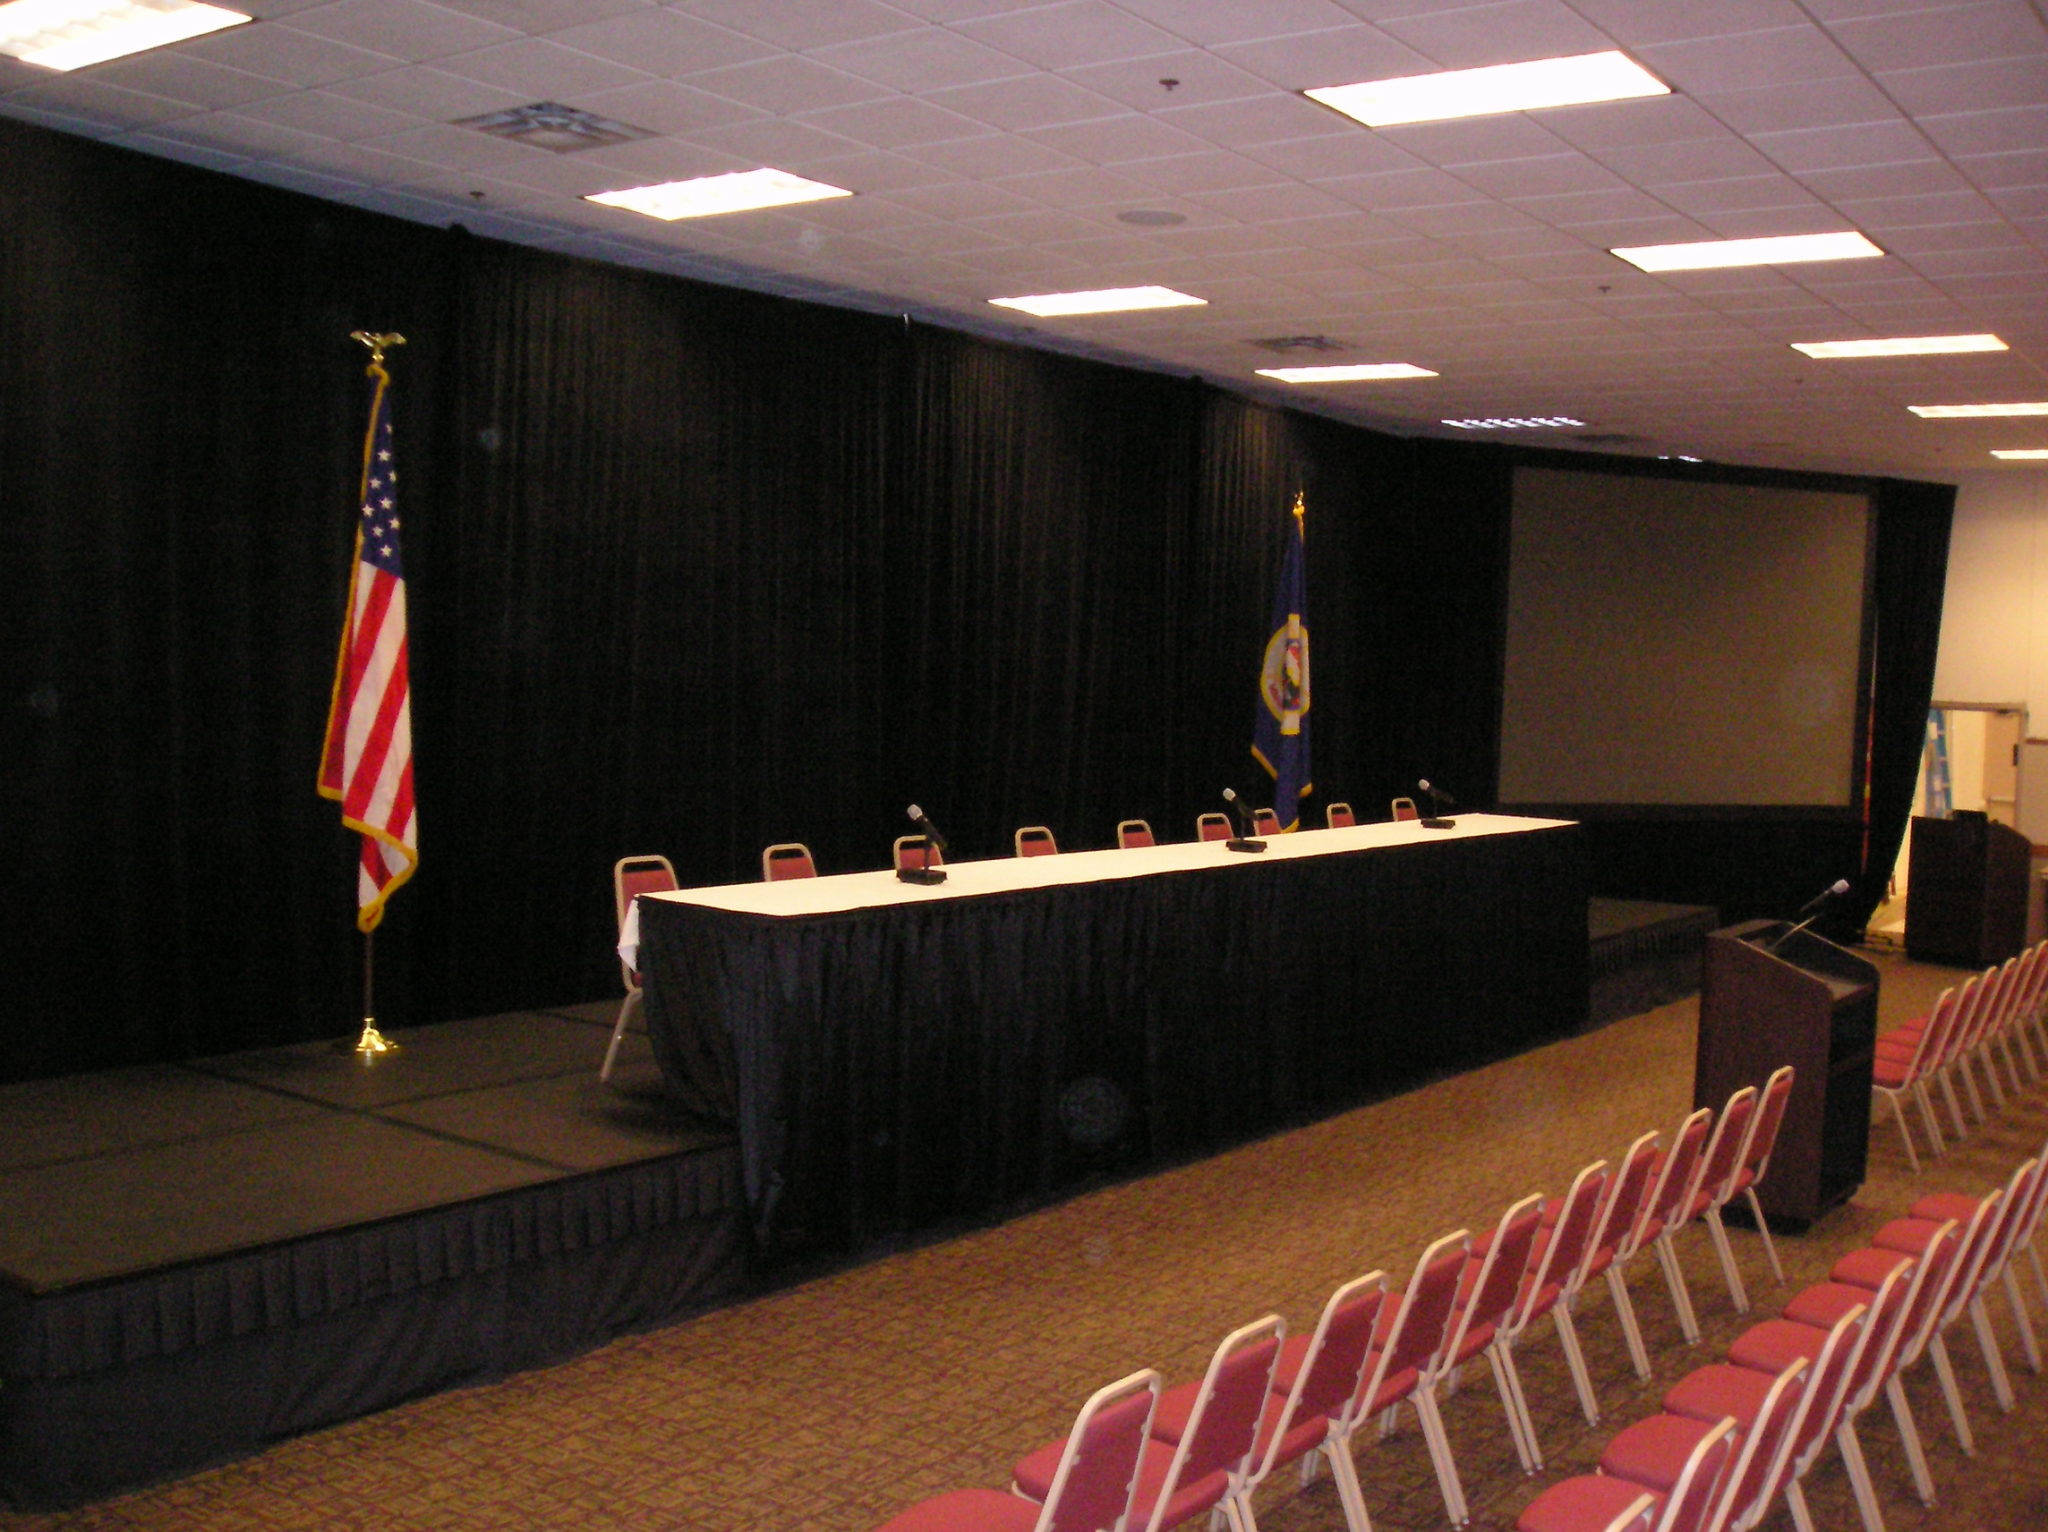 head table with flags on each side on a stage